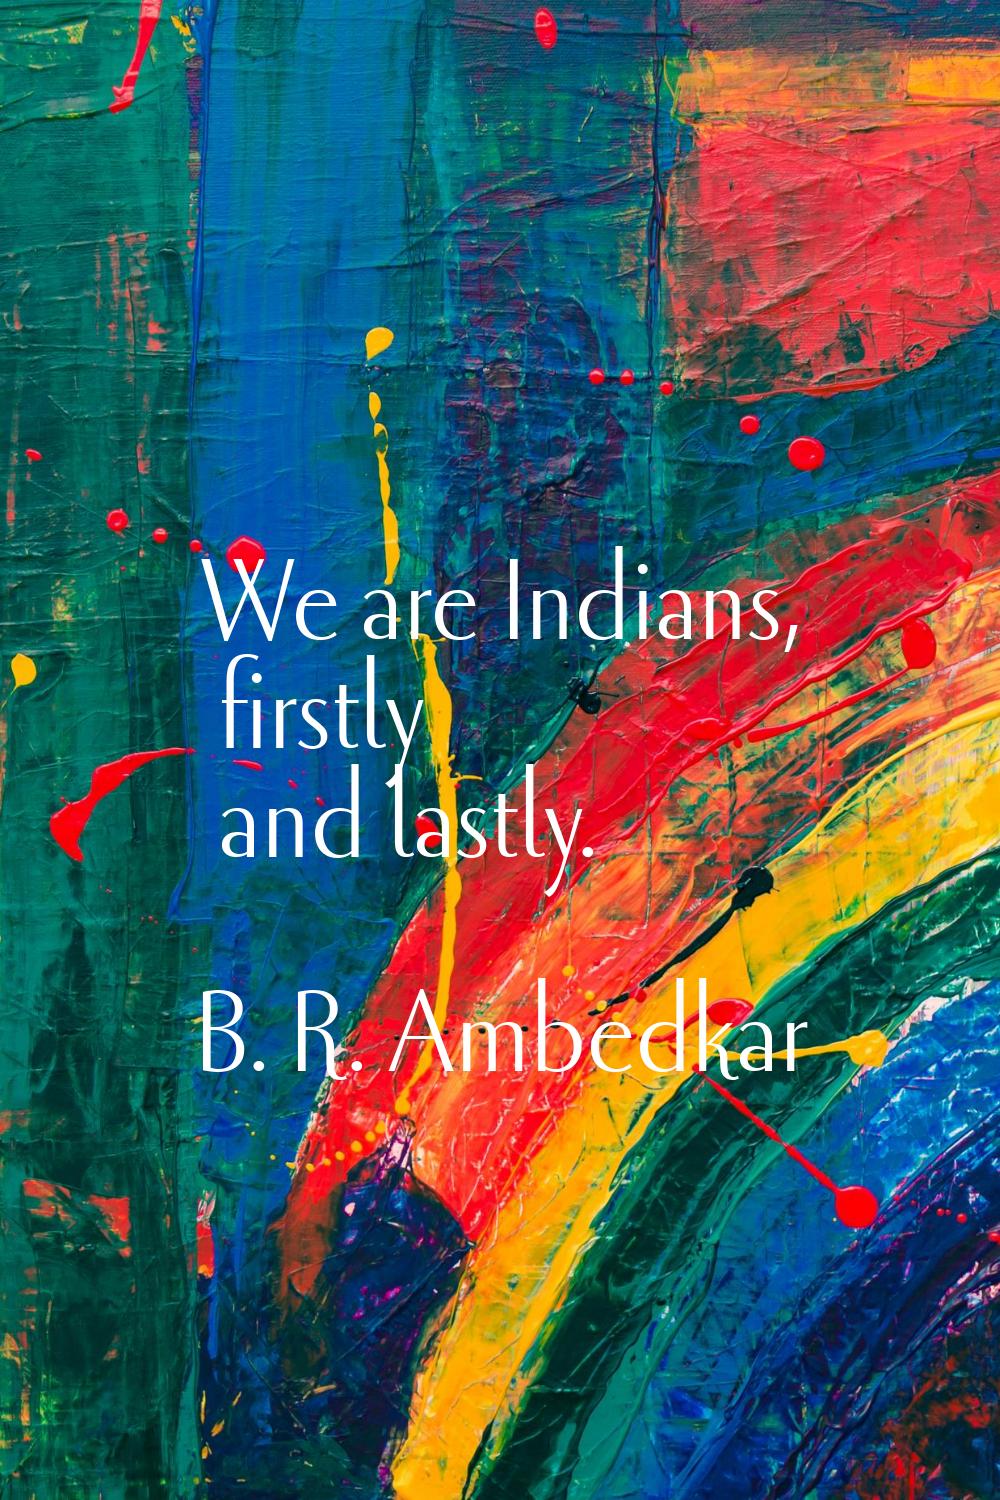 We are Indians, firstly and lastly.